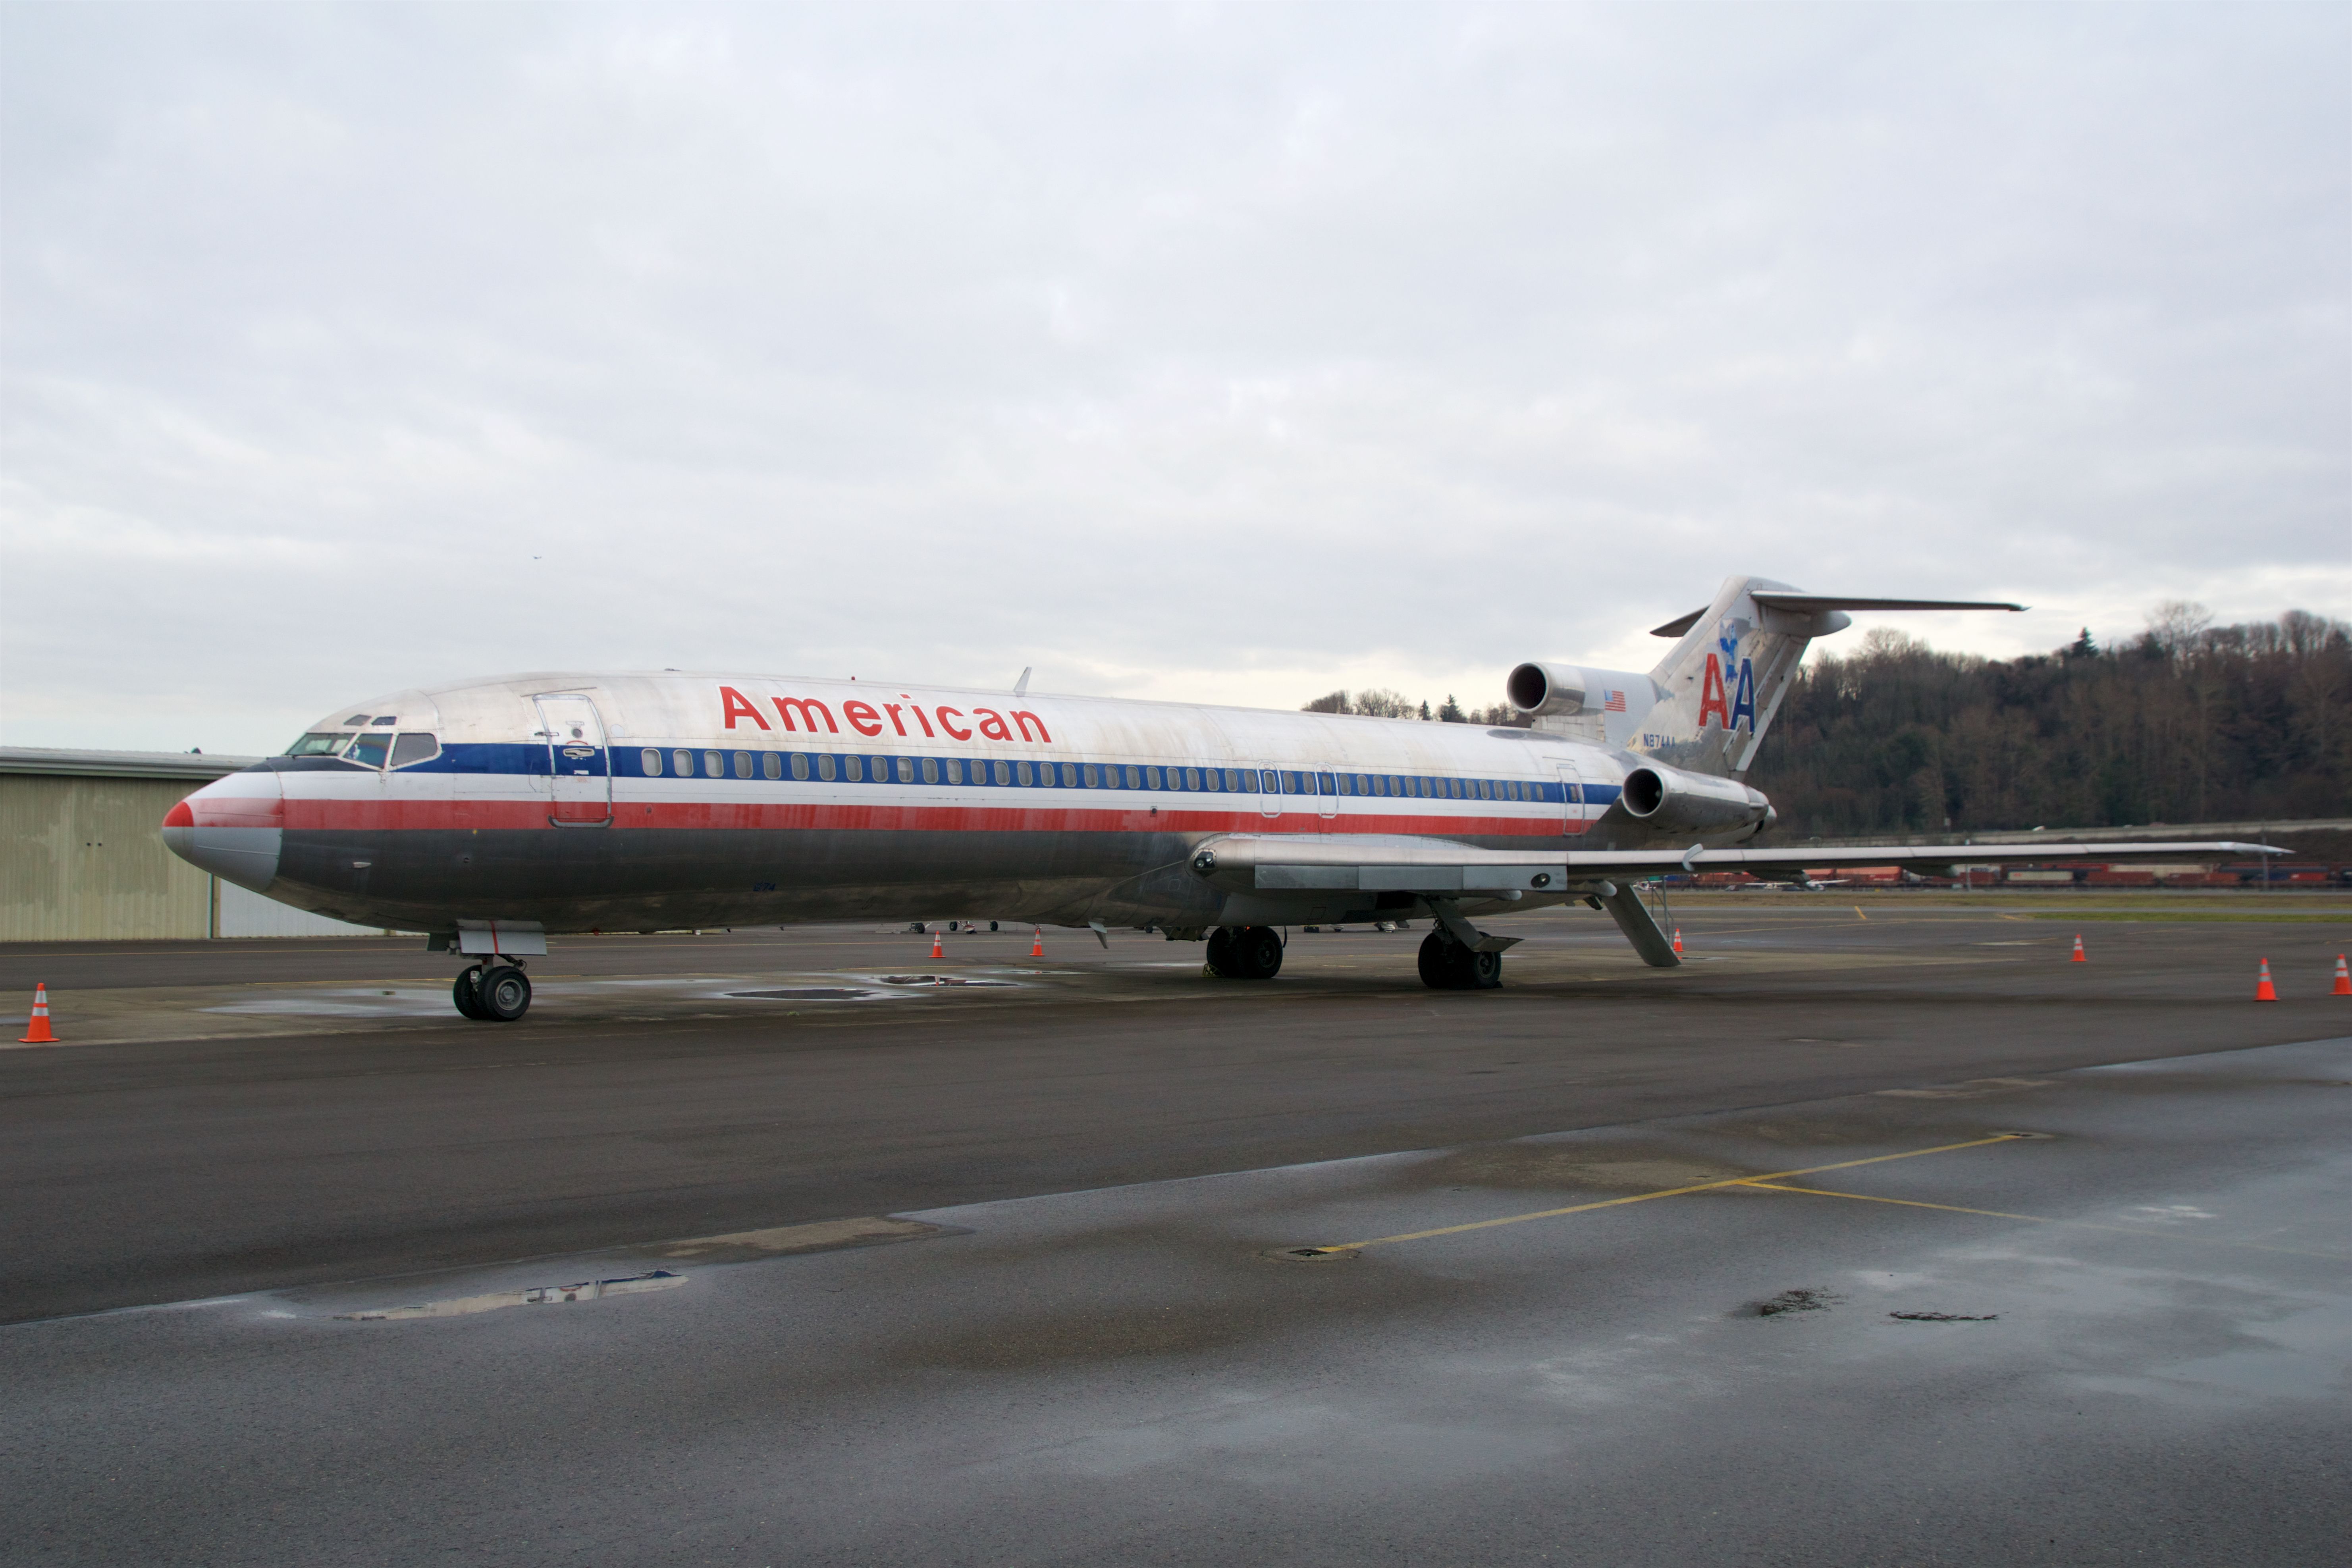 An American Airlines Boeing 727 parked at an airport.